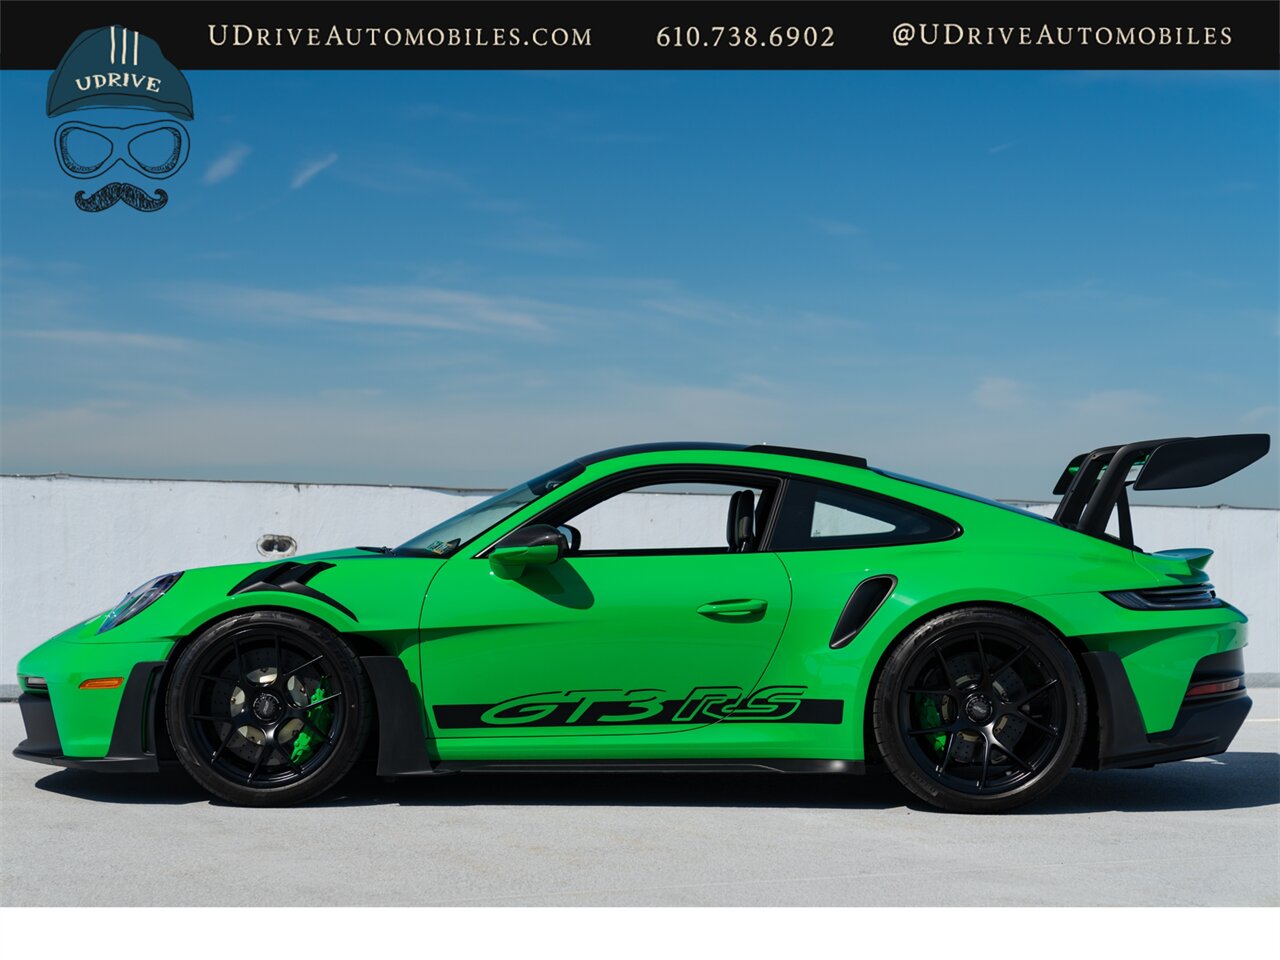 2023 Porsche 911 GT3 RS  Weissach Pkg FAL Full Body PPF $43k in Extras - Photo 9 - West Chester, PA 19382